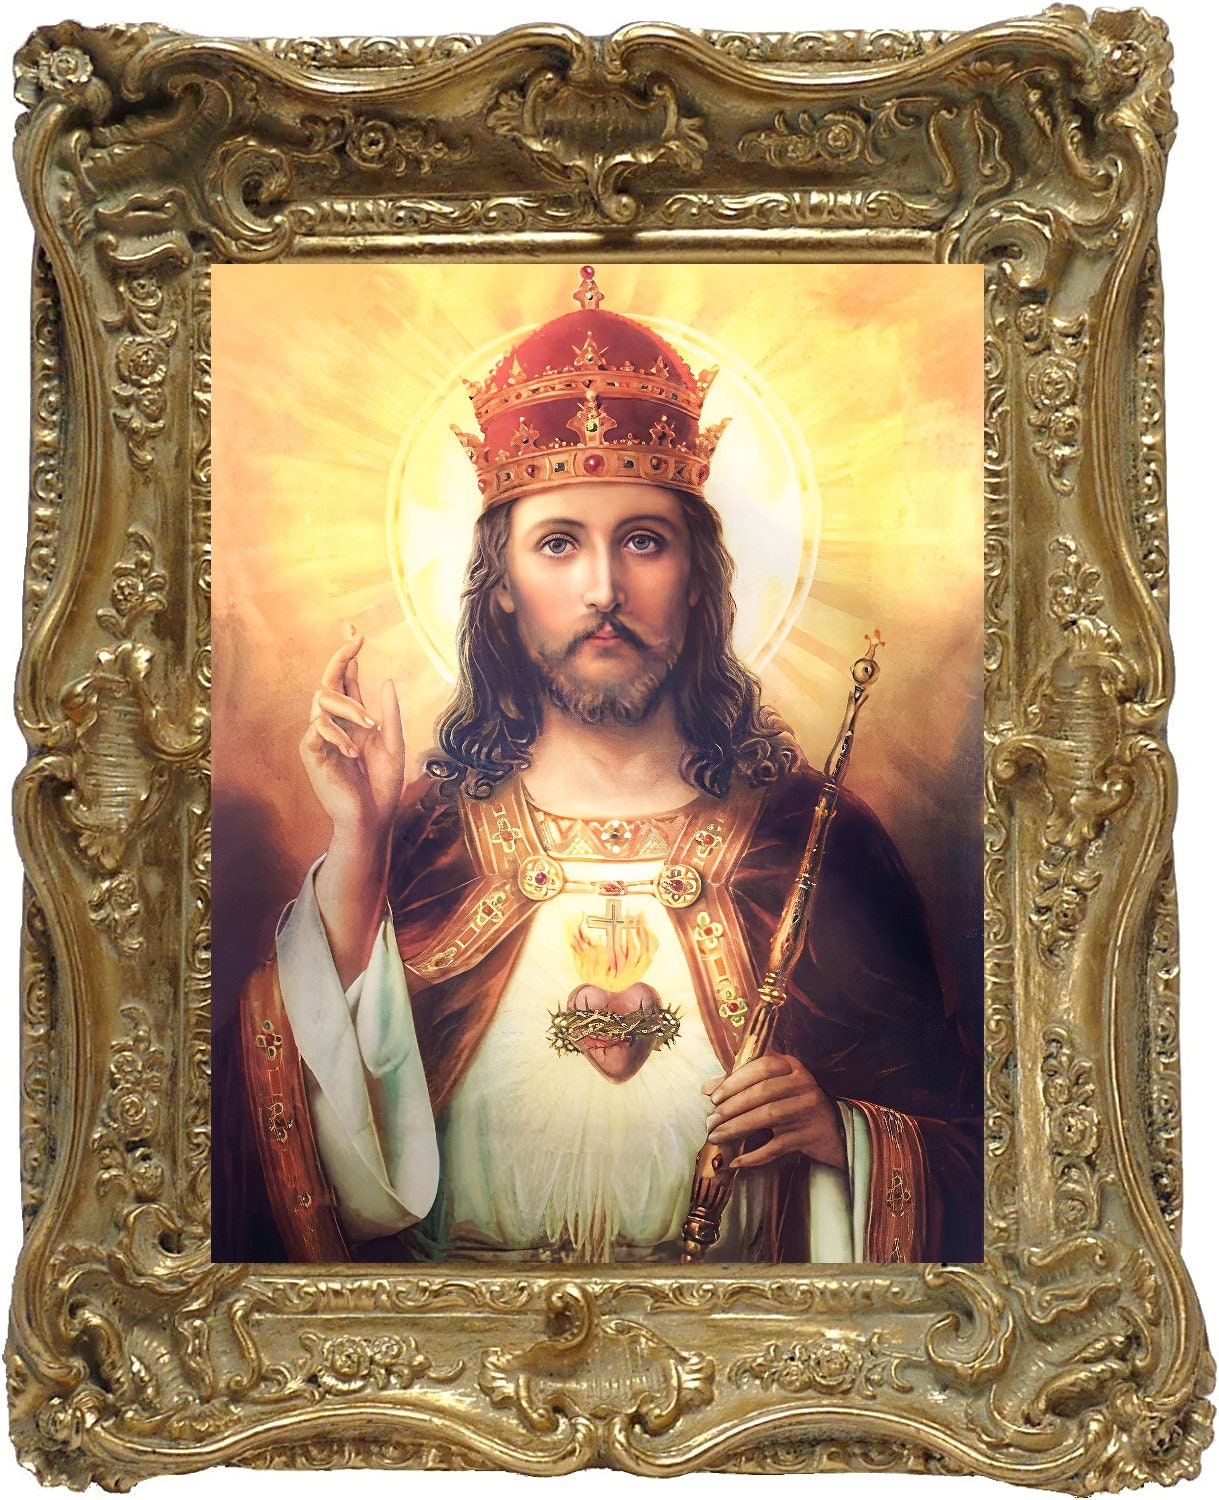 Christ the King - Etsy